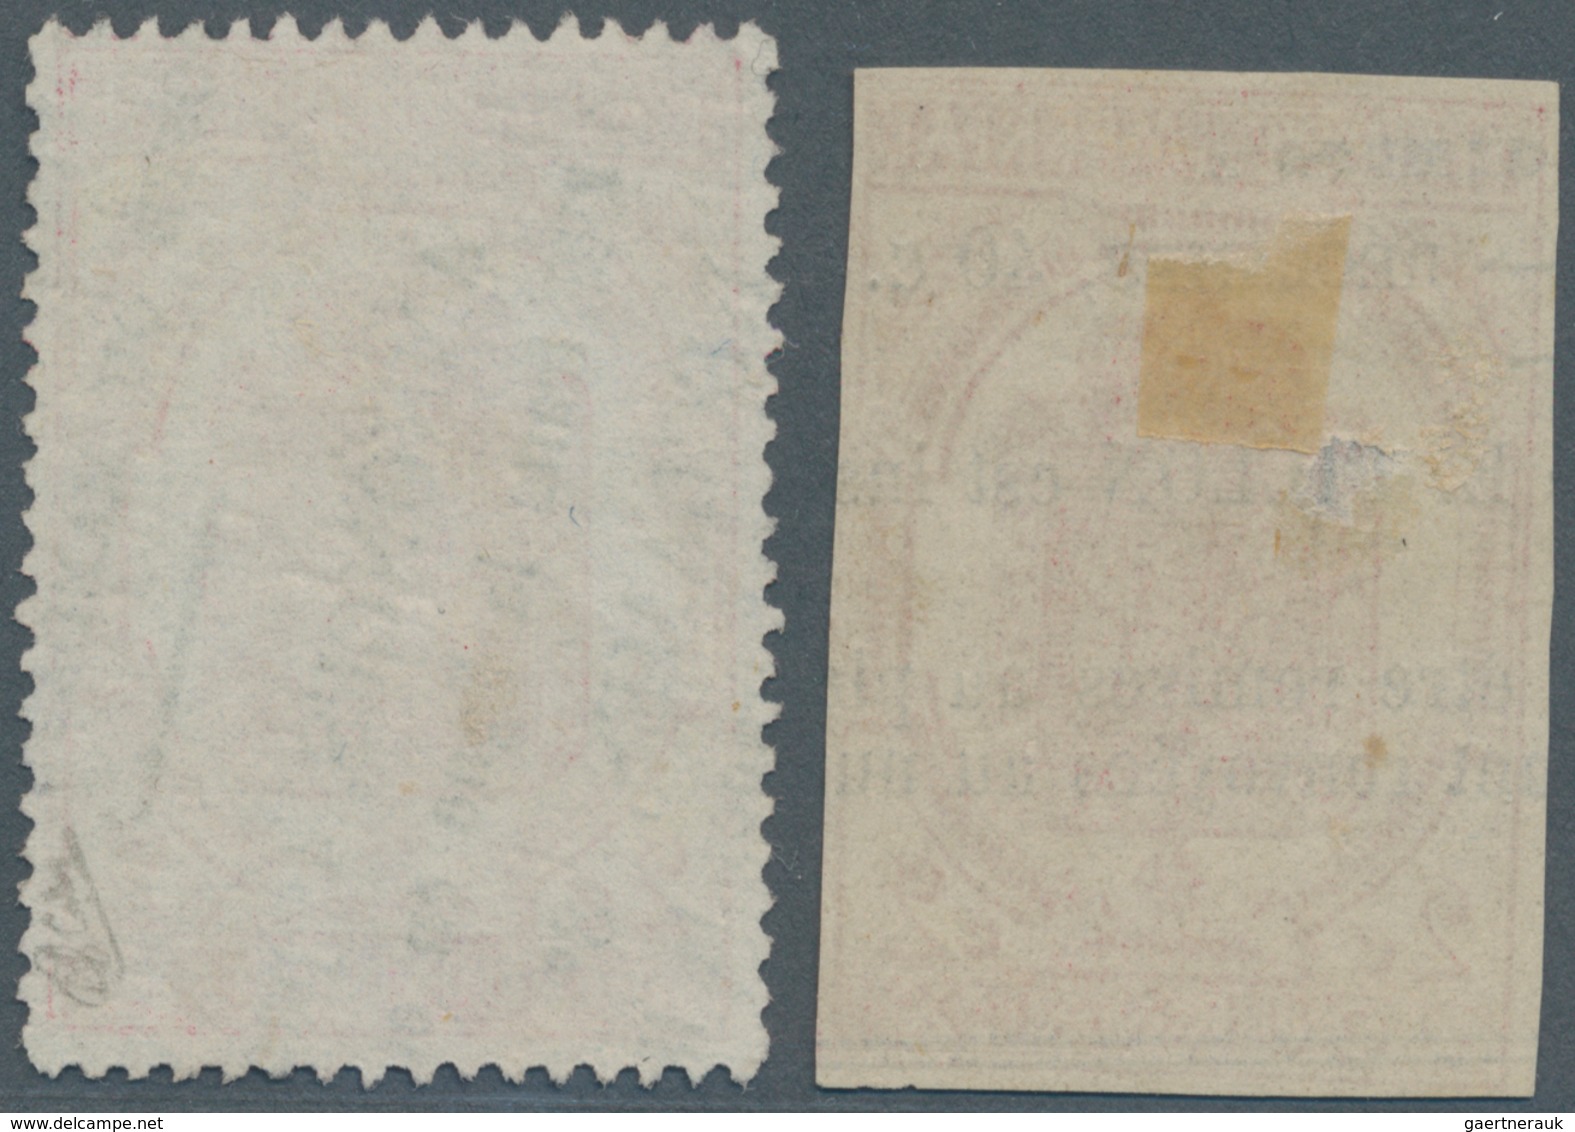 Frankreich - Zeitungsmarken: 1868 (ca): 2 C Newspaper Stamps, Imperofrated And Perforated, Each Supe - Kranten